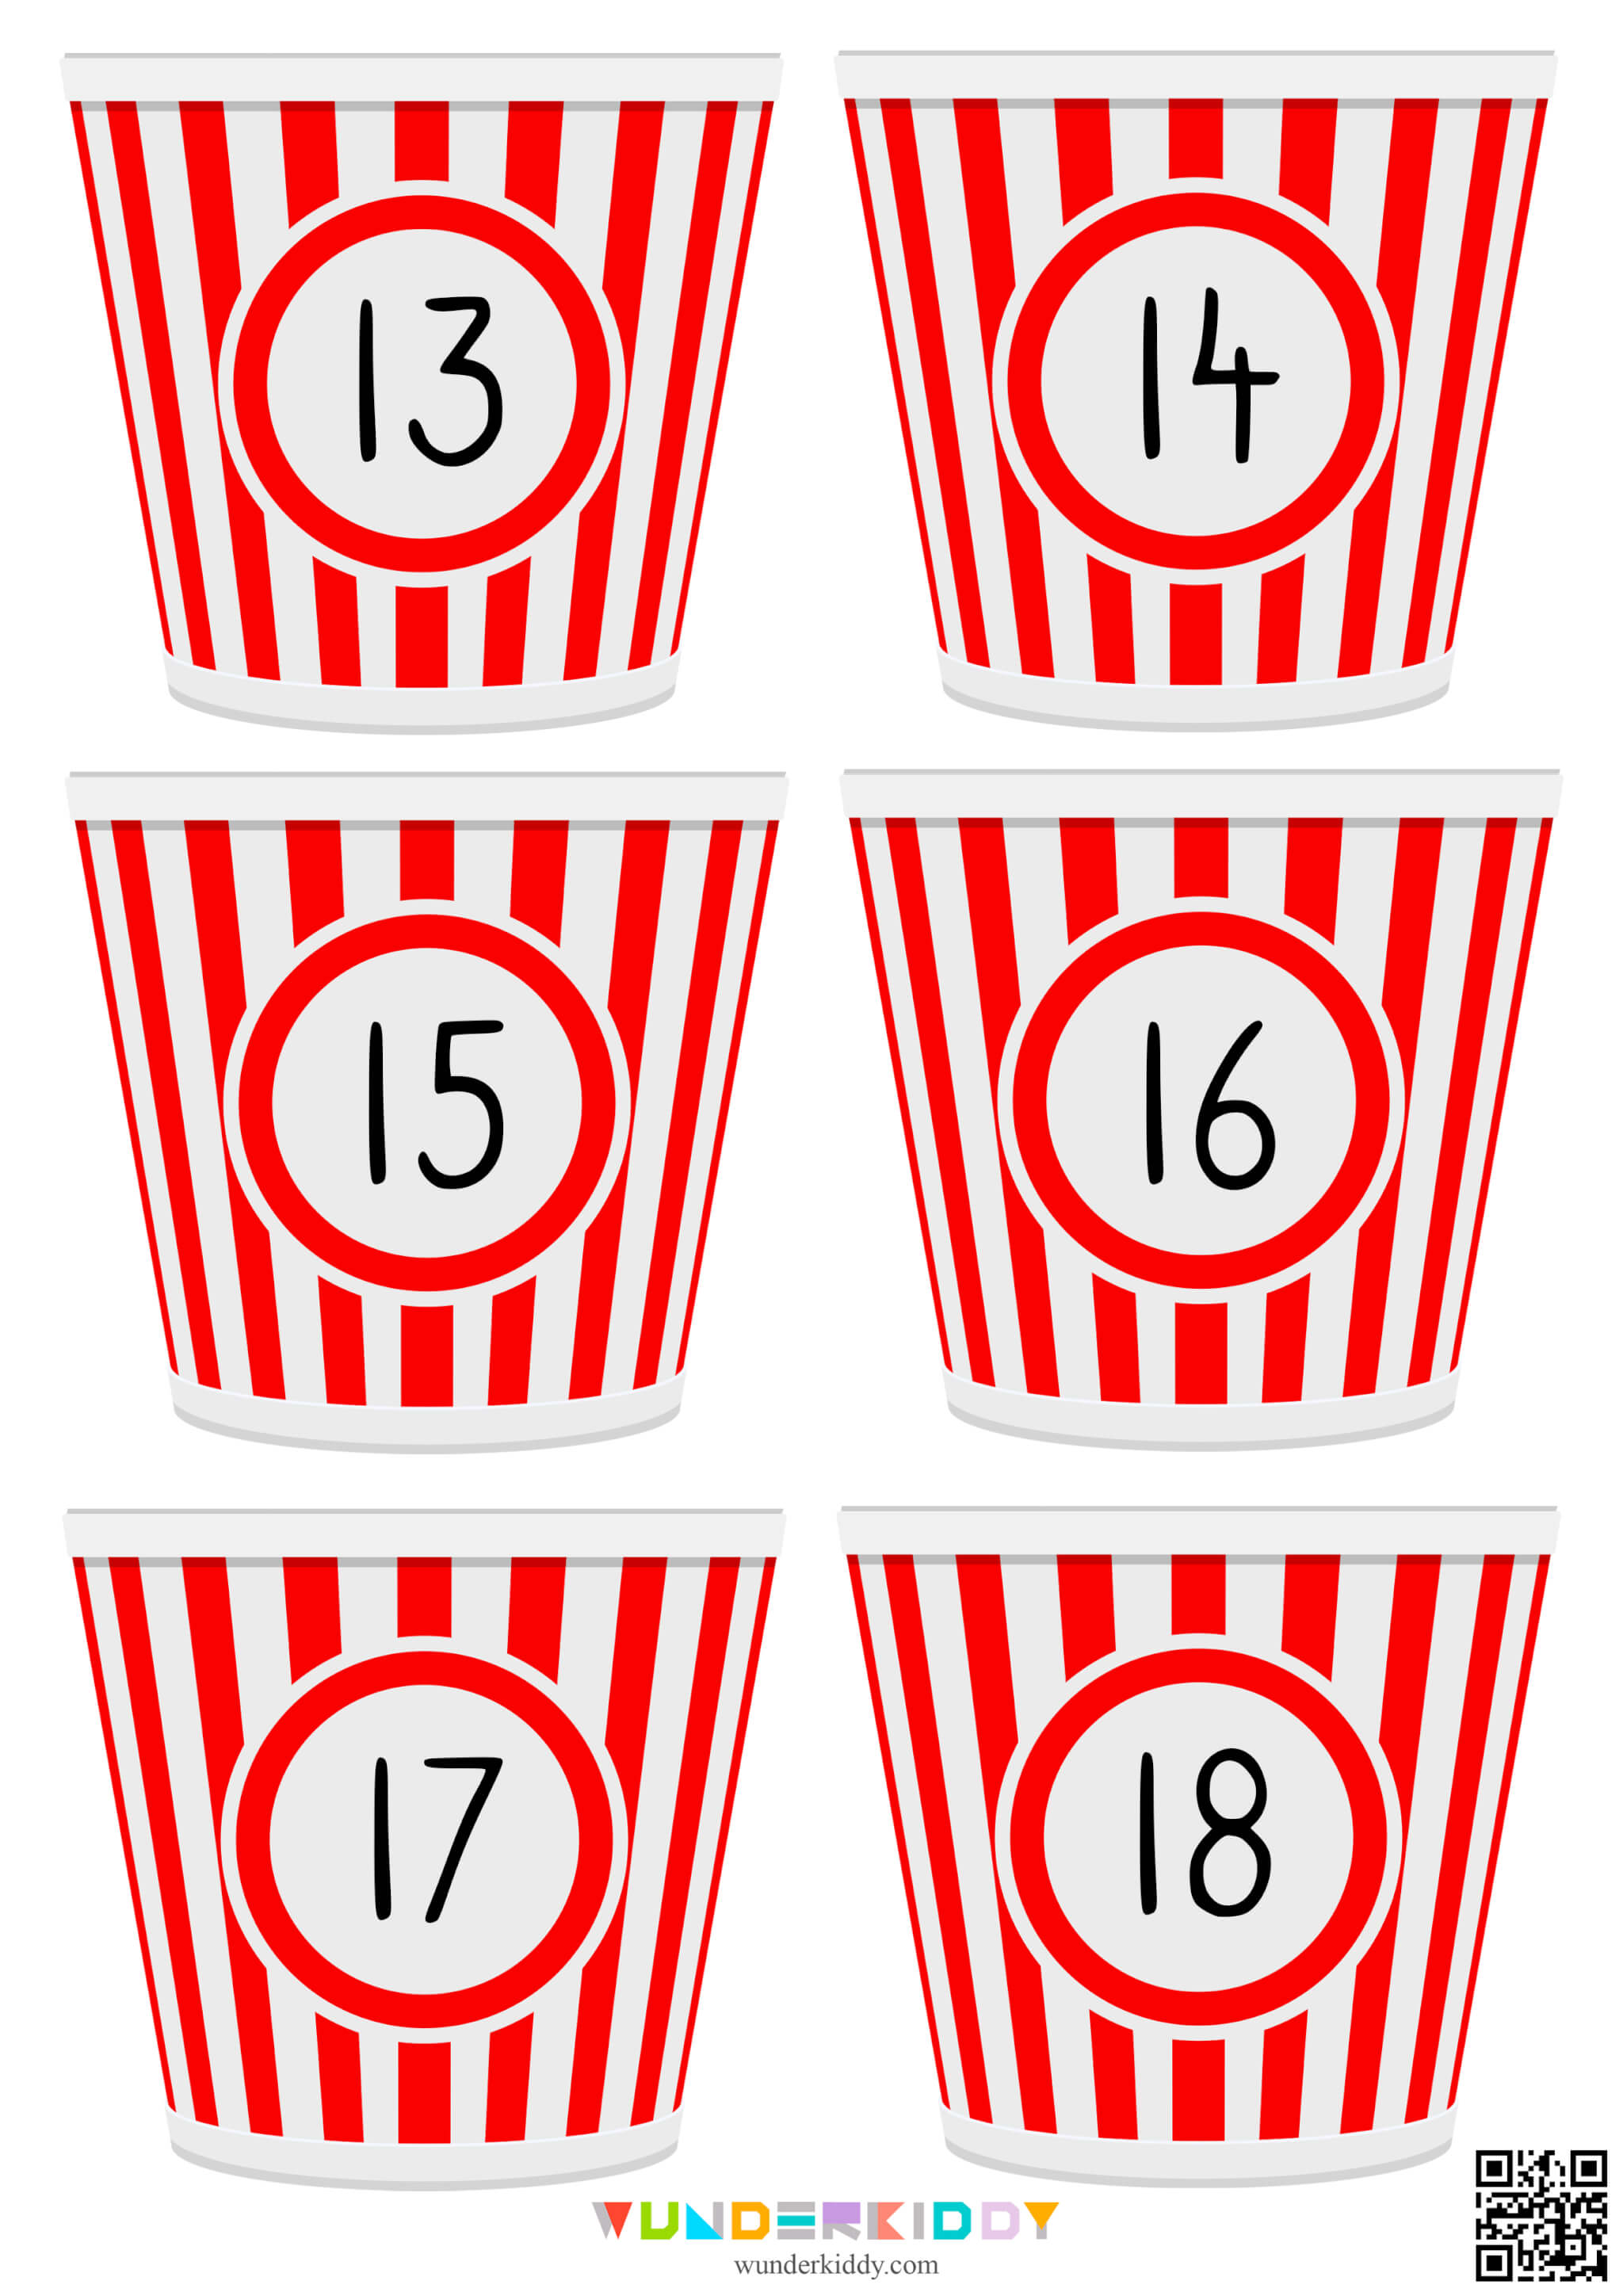 Popcorn Counting Cards - Image 4